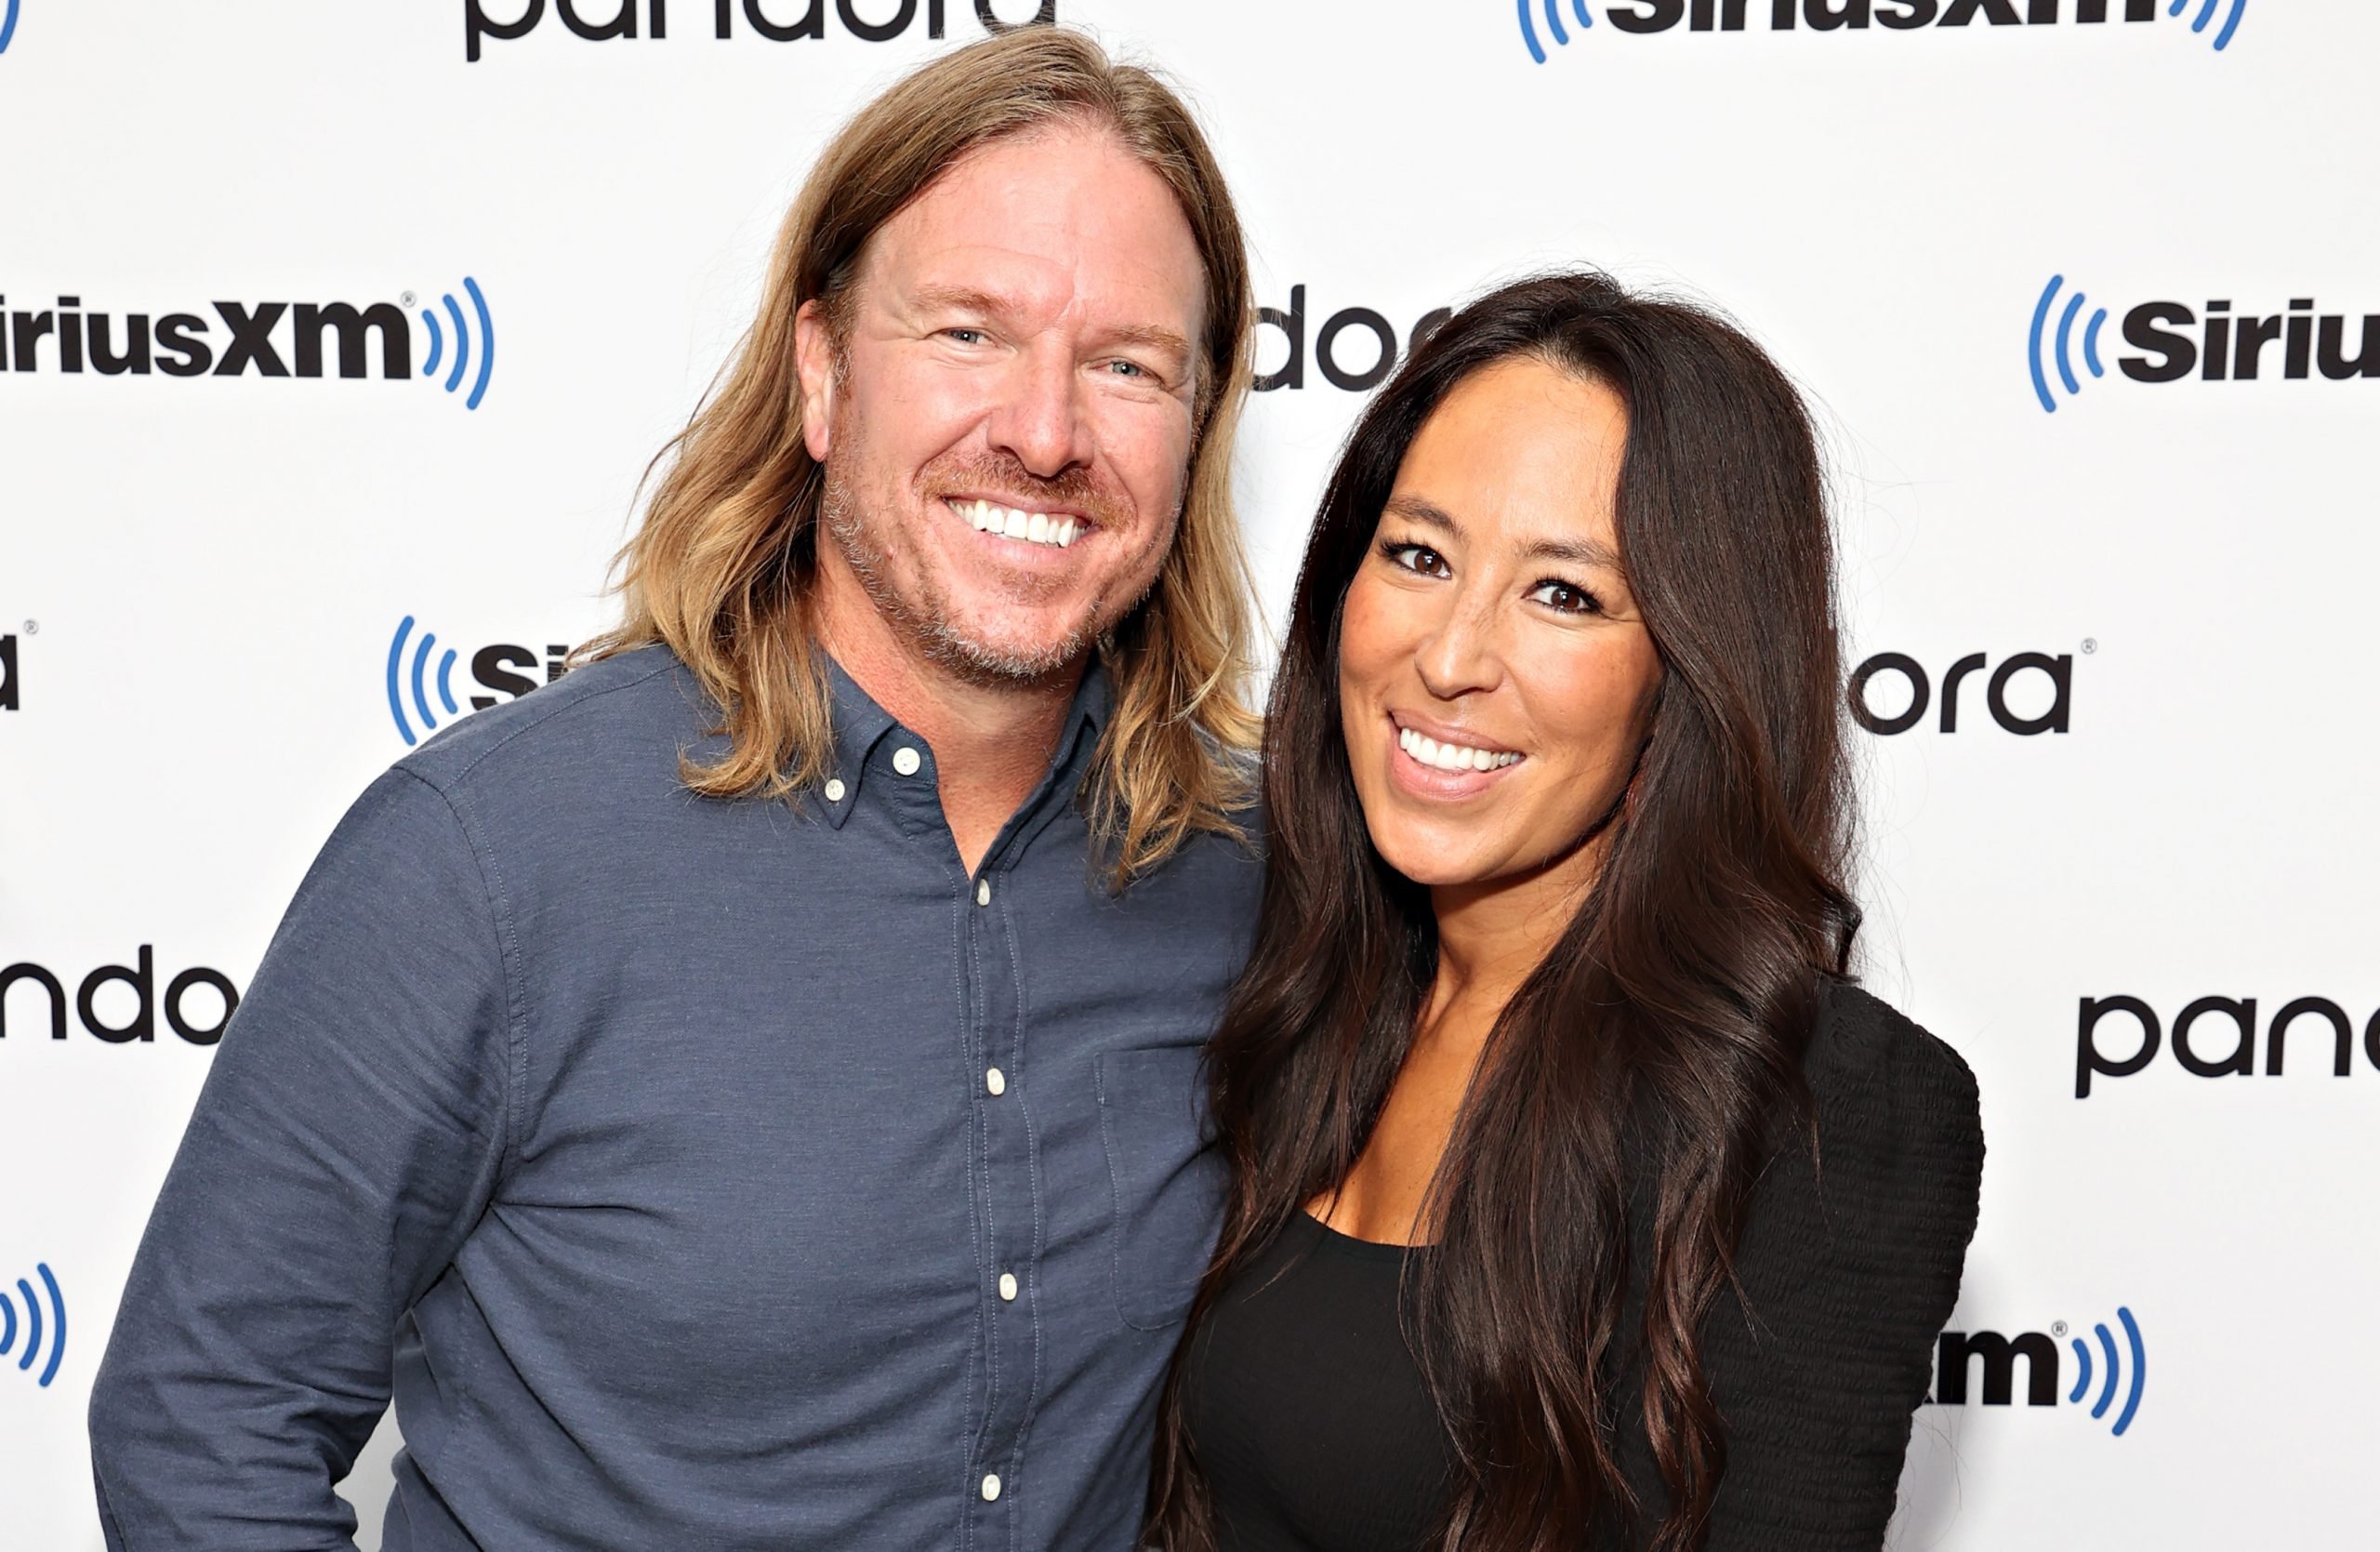 Chip and Joanna Gaines posing together and smiling for the camera against a SiriusXM backdrop